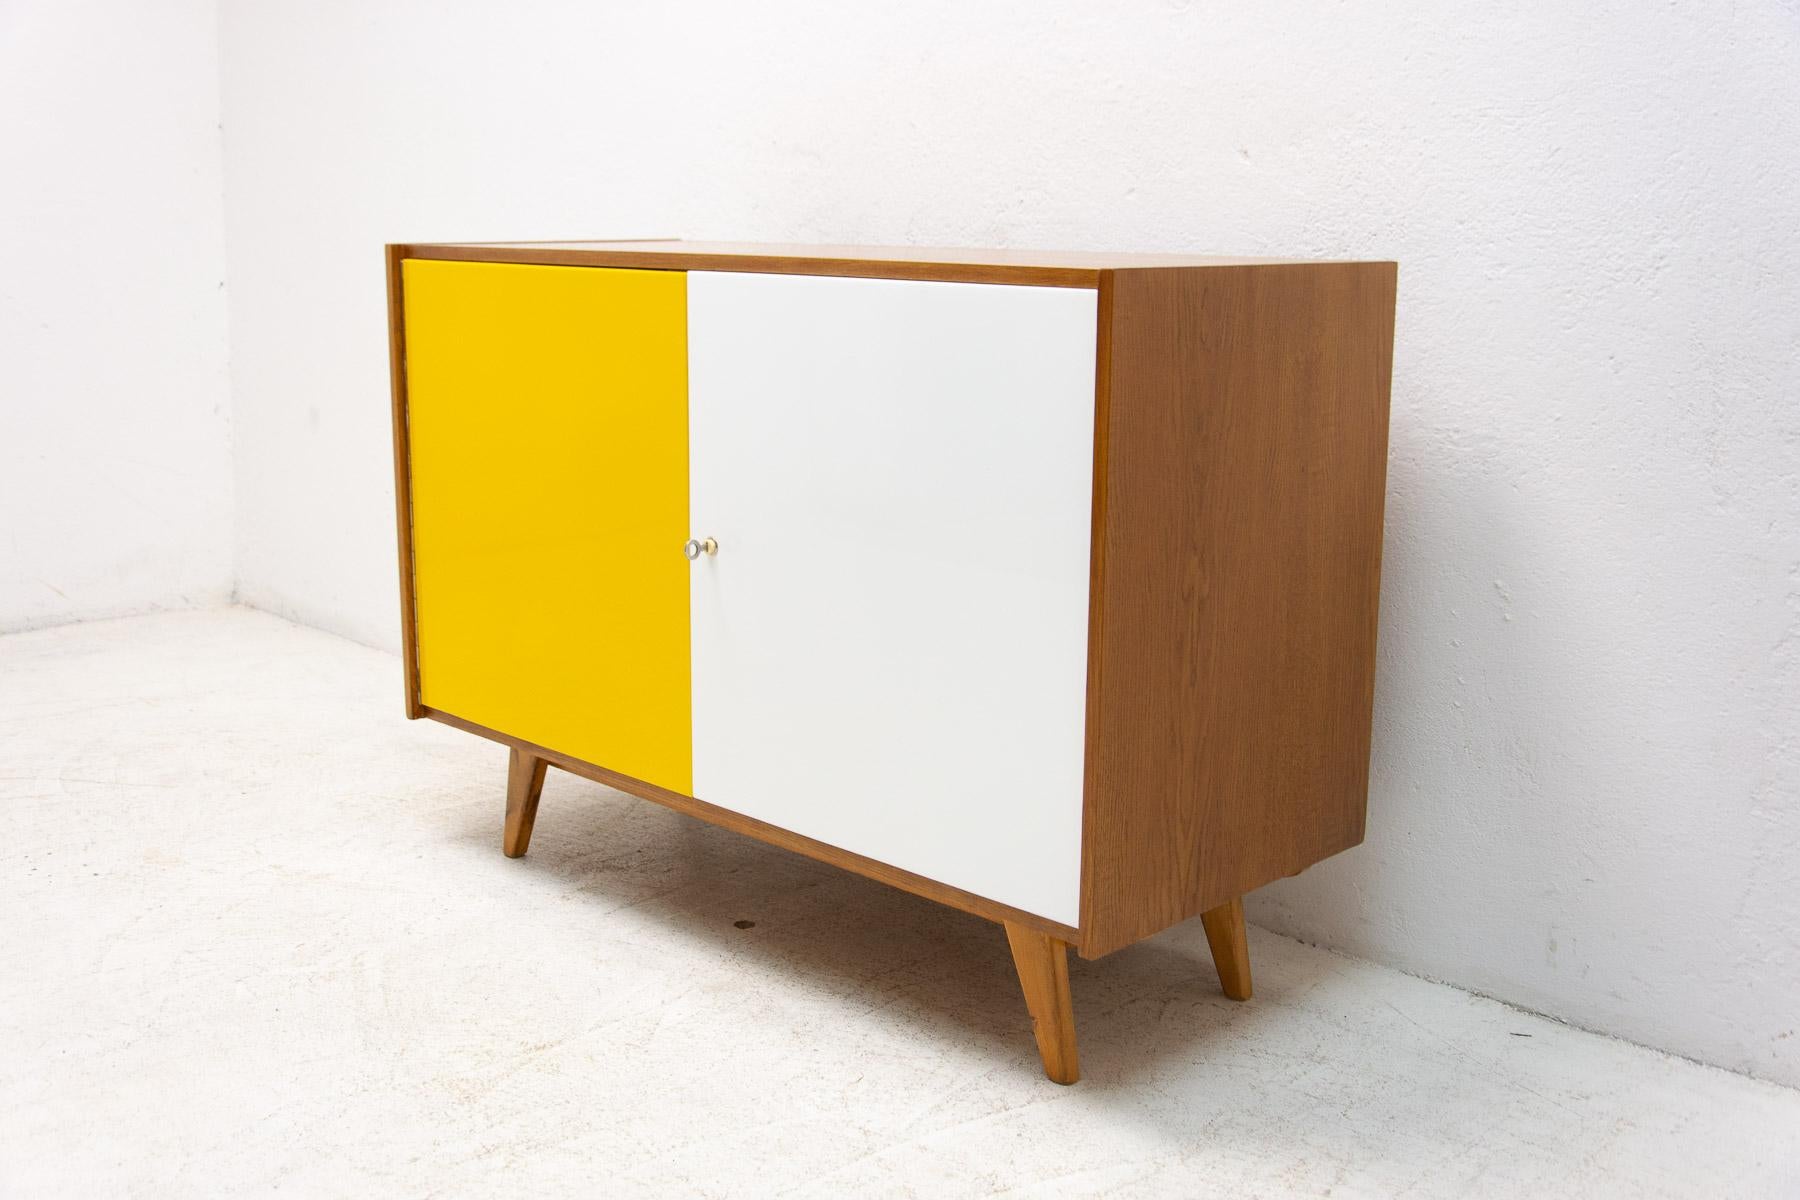 Mid century sideboard-cabinet, catalogue No. U-450, designed by Jiri Jiroutek. It´s made of beechwood, veneer, plywood and laminate. In very good condition.

The cabinet comes from the famous Universal series (U-450), which was designed in 1958